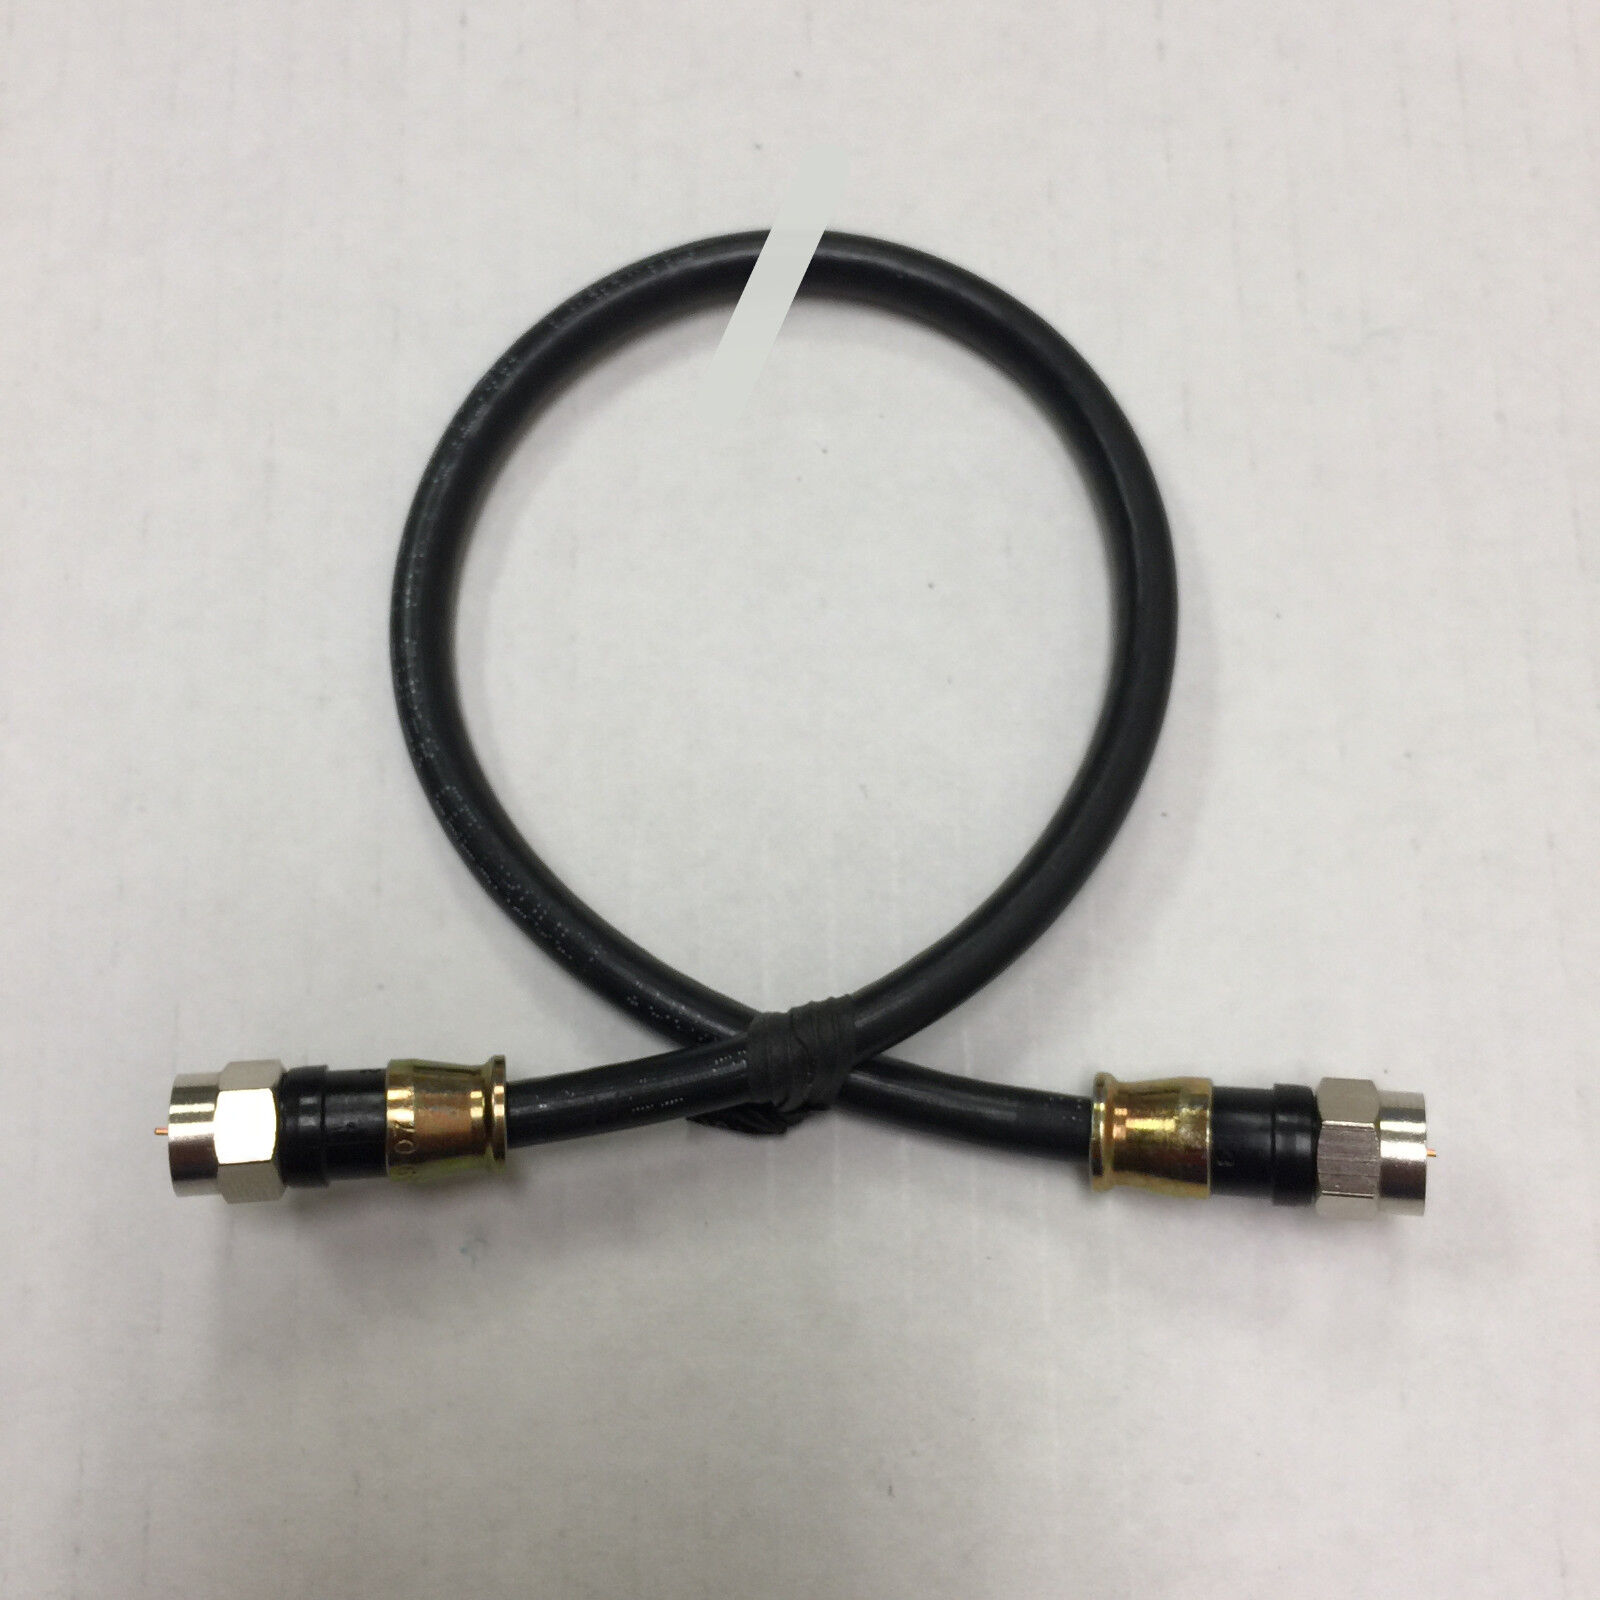 RG59 PPC F Black Coaxial Coax 0.5 - 95 Ft Cable Wire Satellite HD Antenna TV lot. Available Now for 4.87